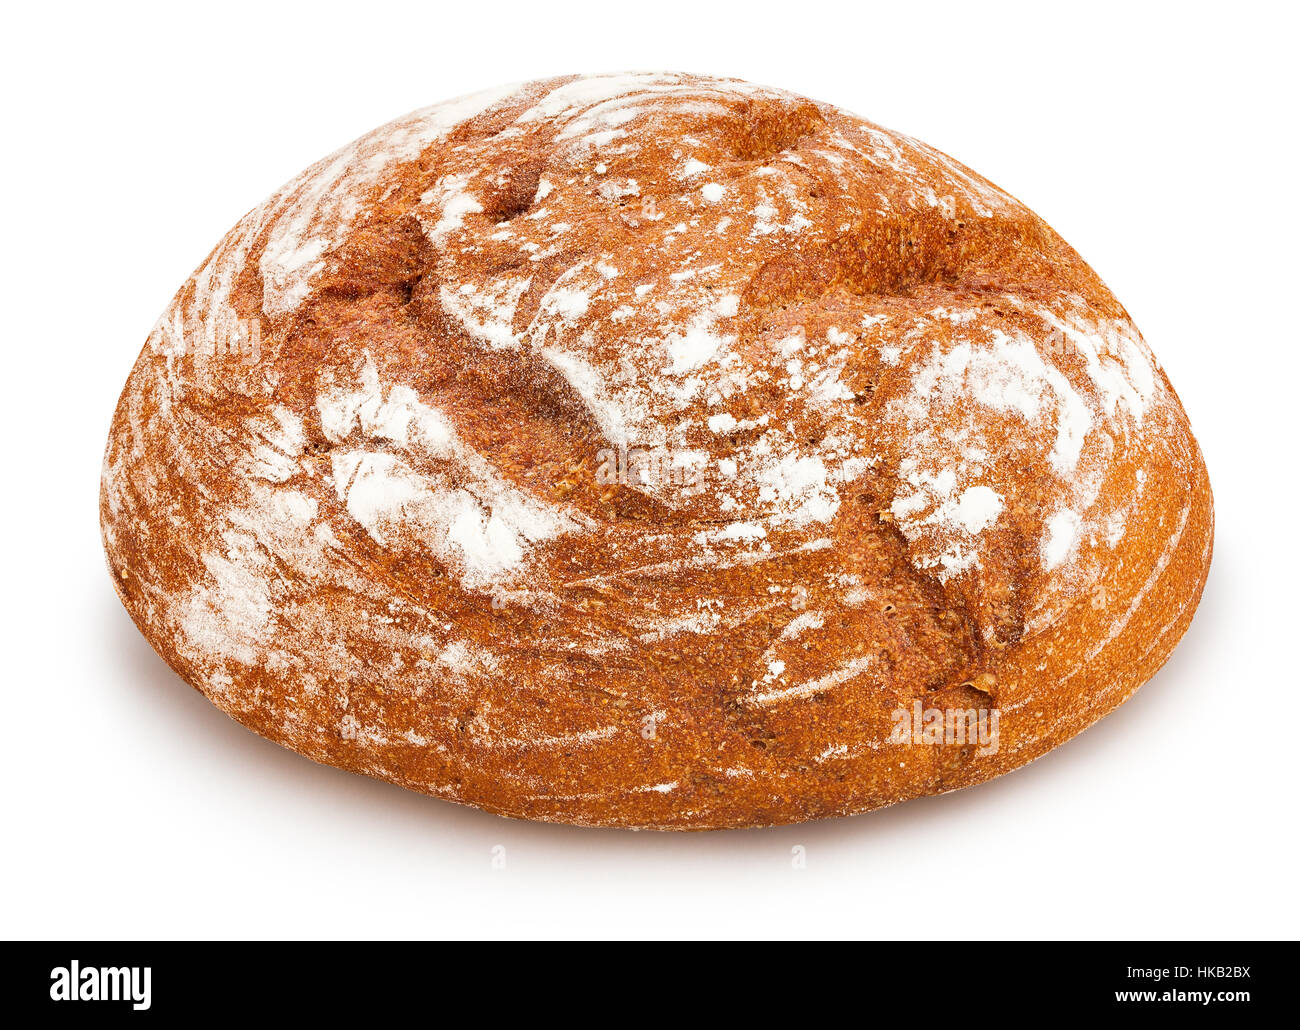 brown bread loaf isolated Stock Photo